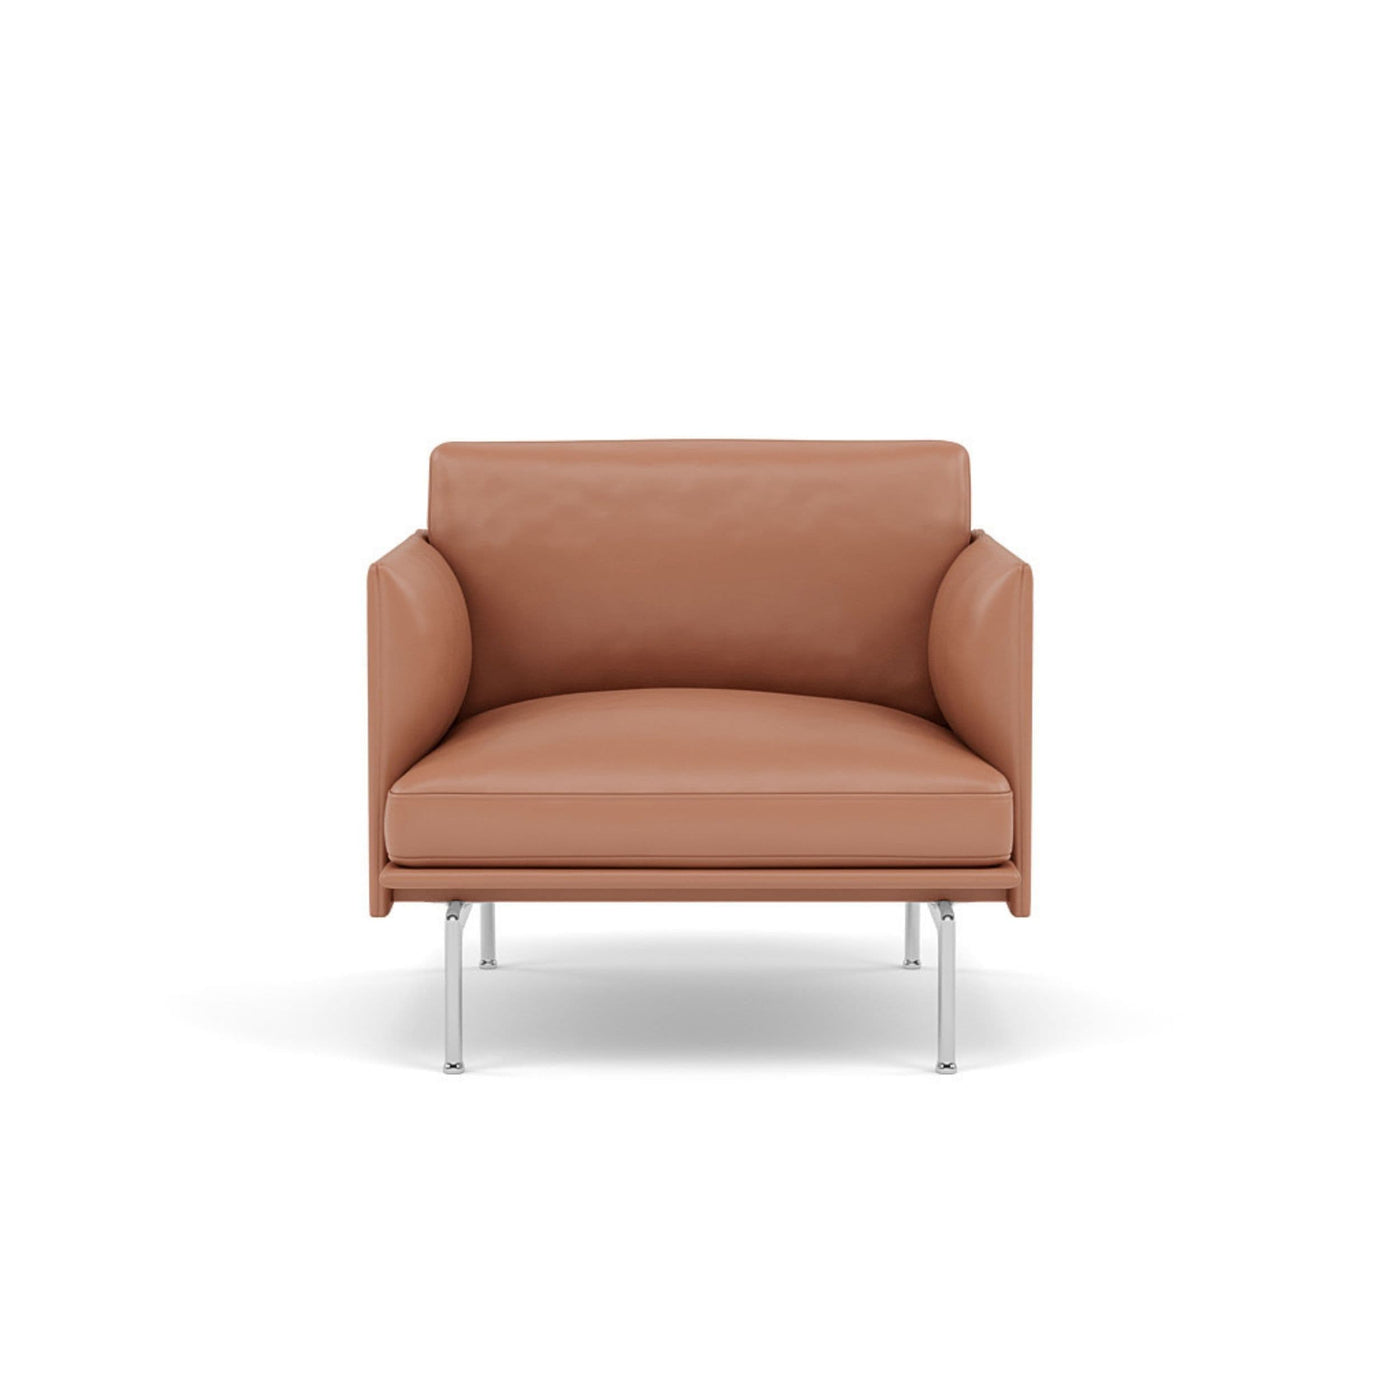 muuto outline studio chair in cognac refine leather and polished aluminium legs. Available at someday designs. #colour_cognac-refine-leather